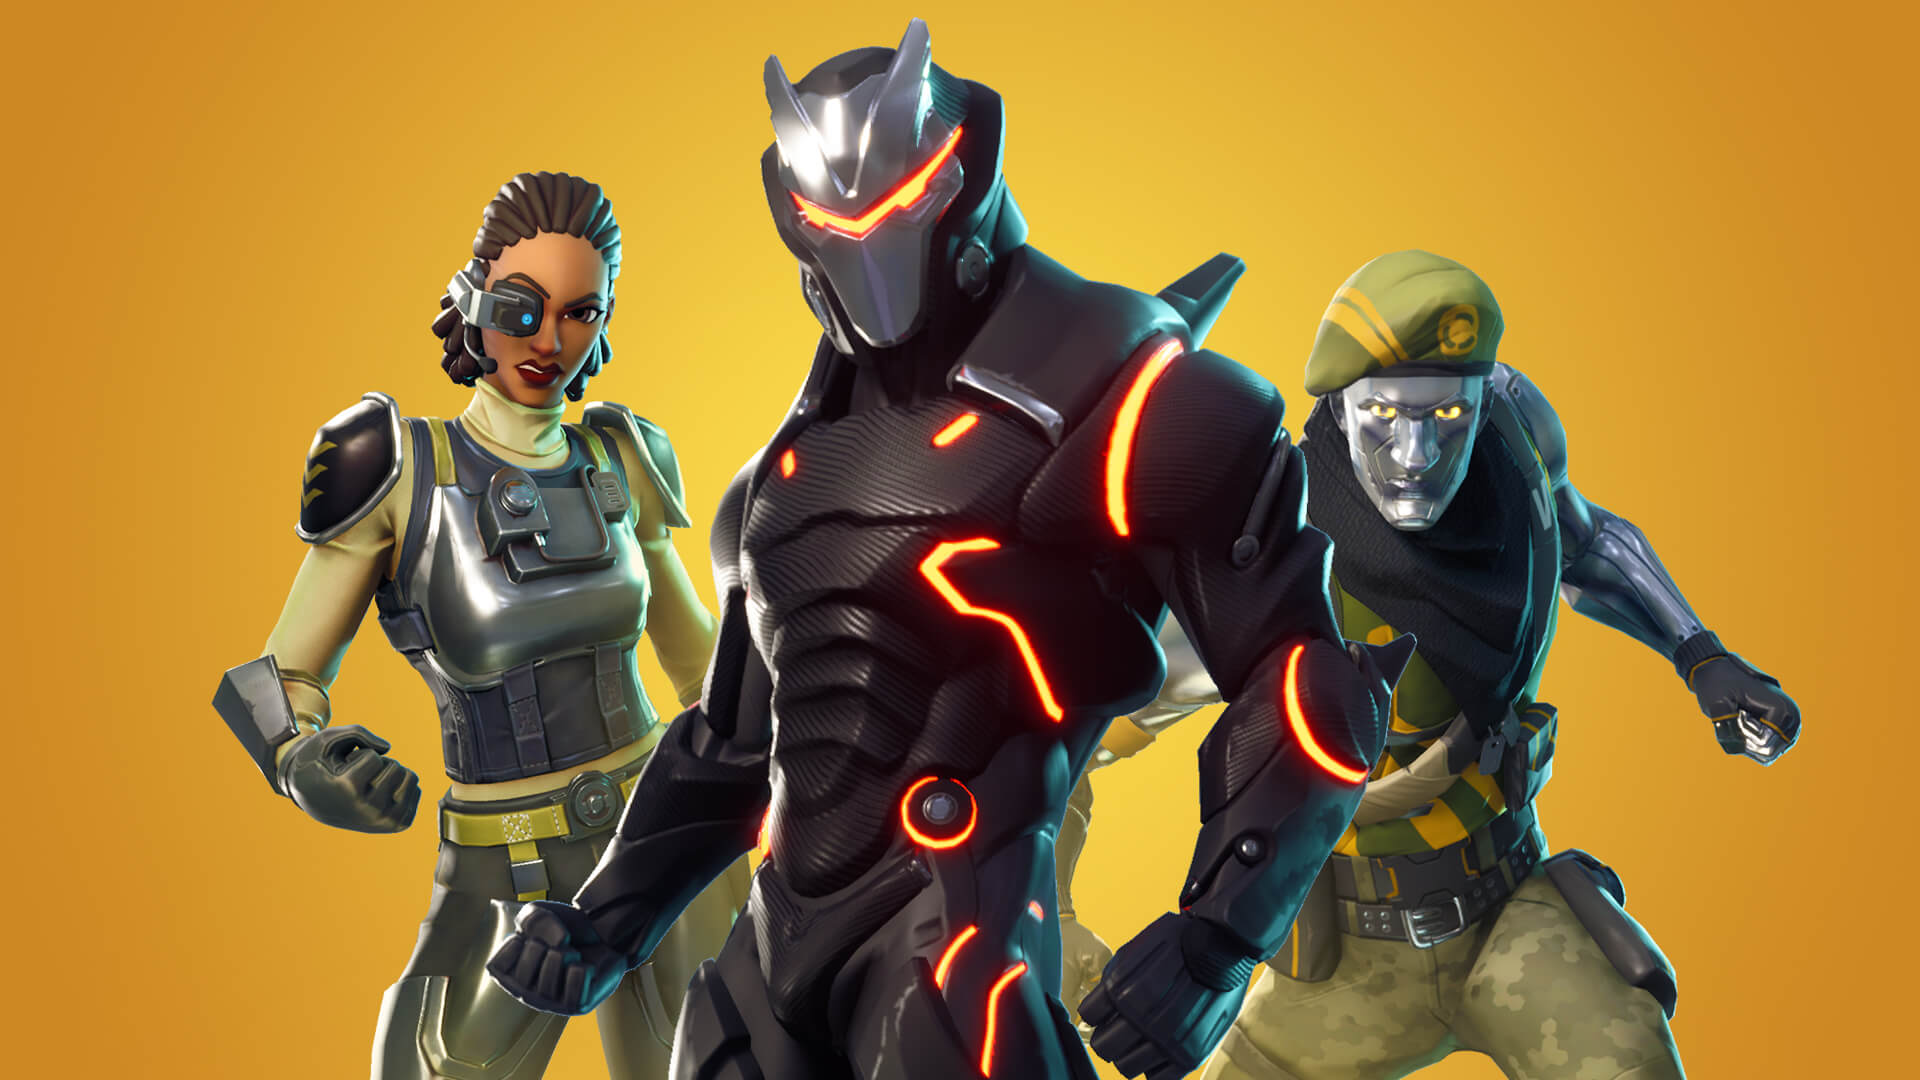 Fortnite made $2.4 billion in 2018 as free-to-play and mobile games  dominated the market